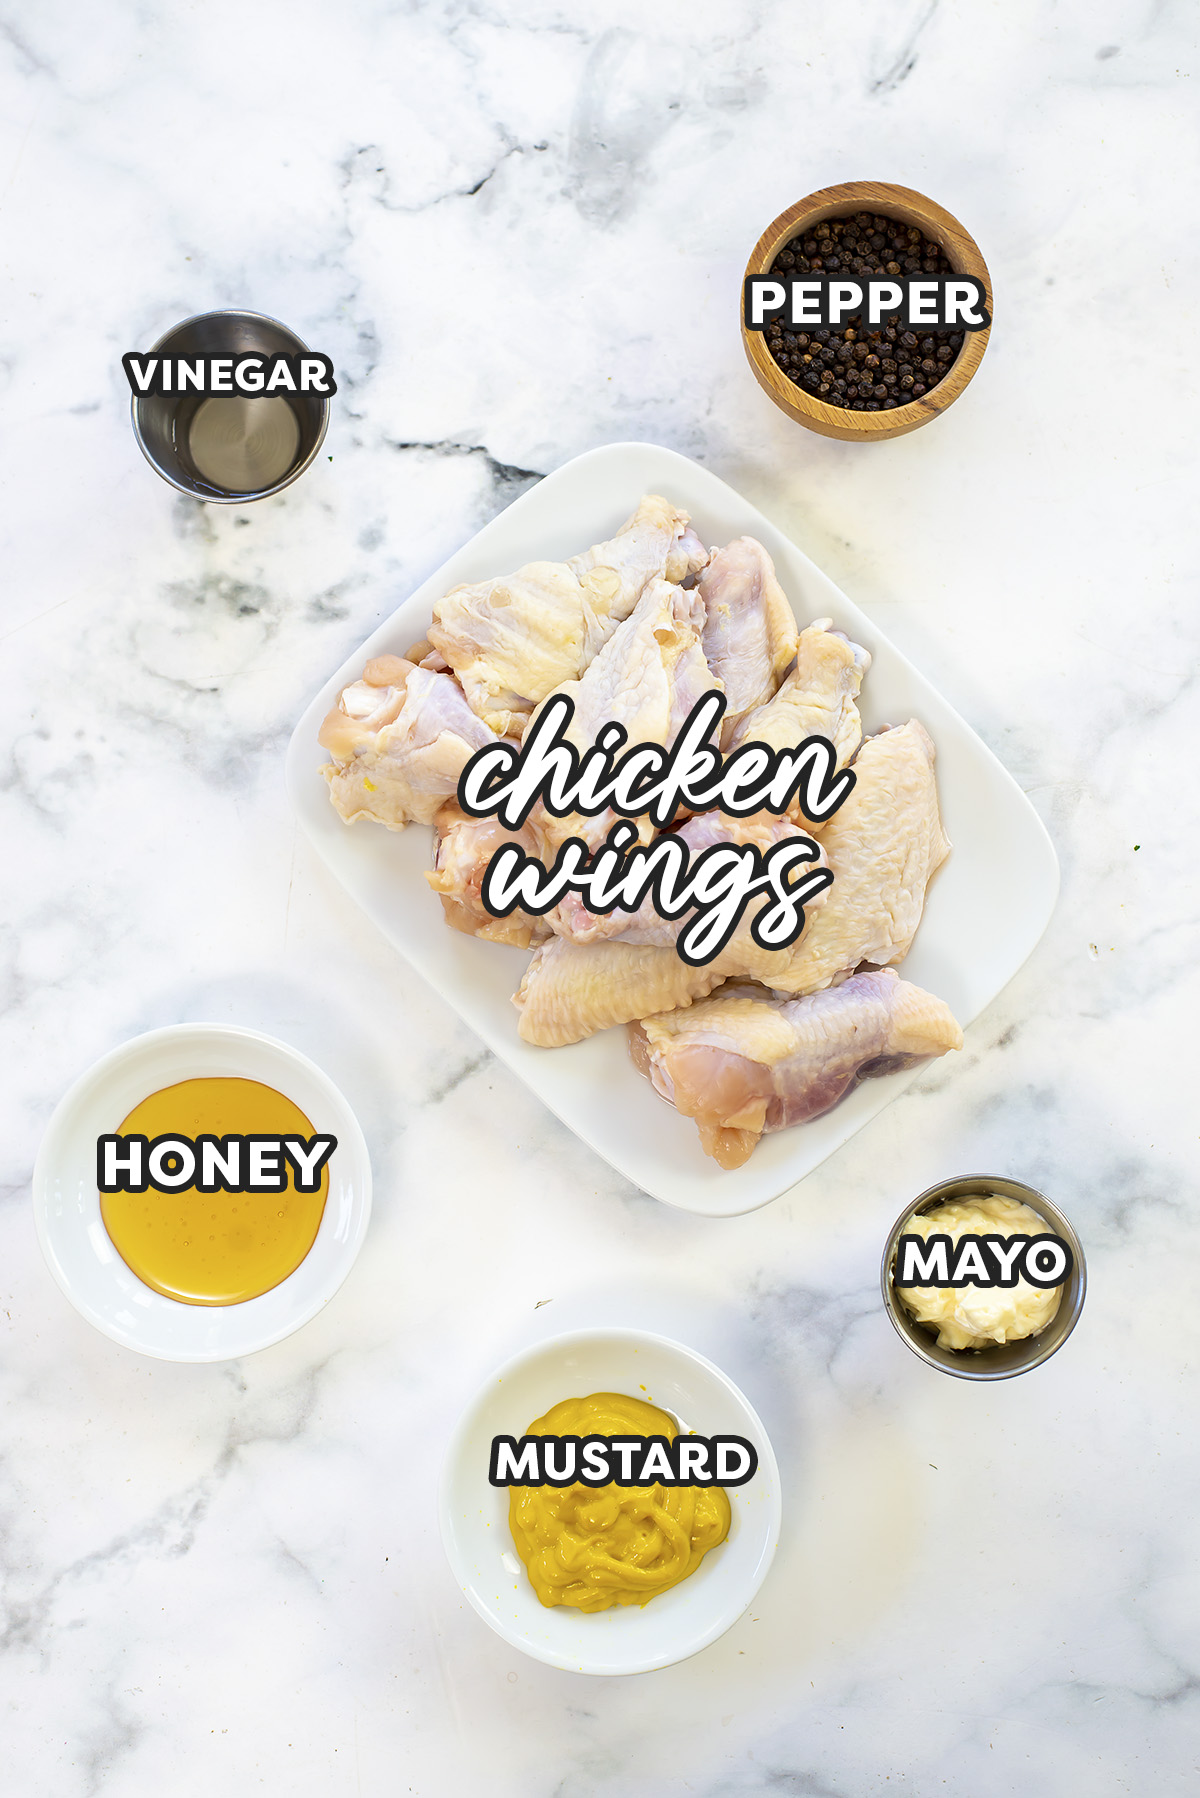 Honey mustard wing ingredients on a white countertop.